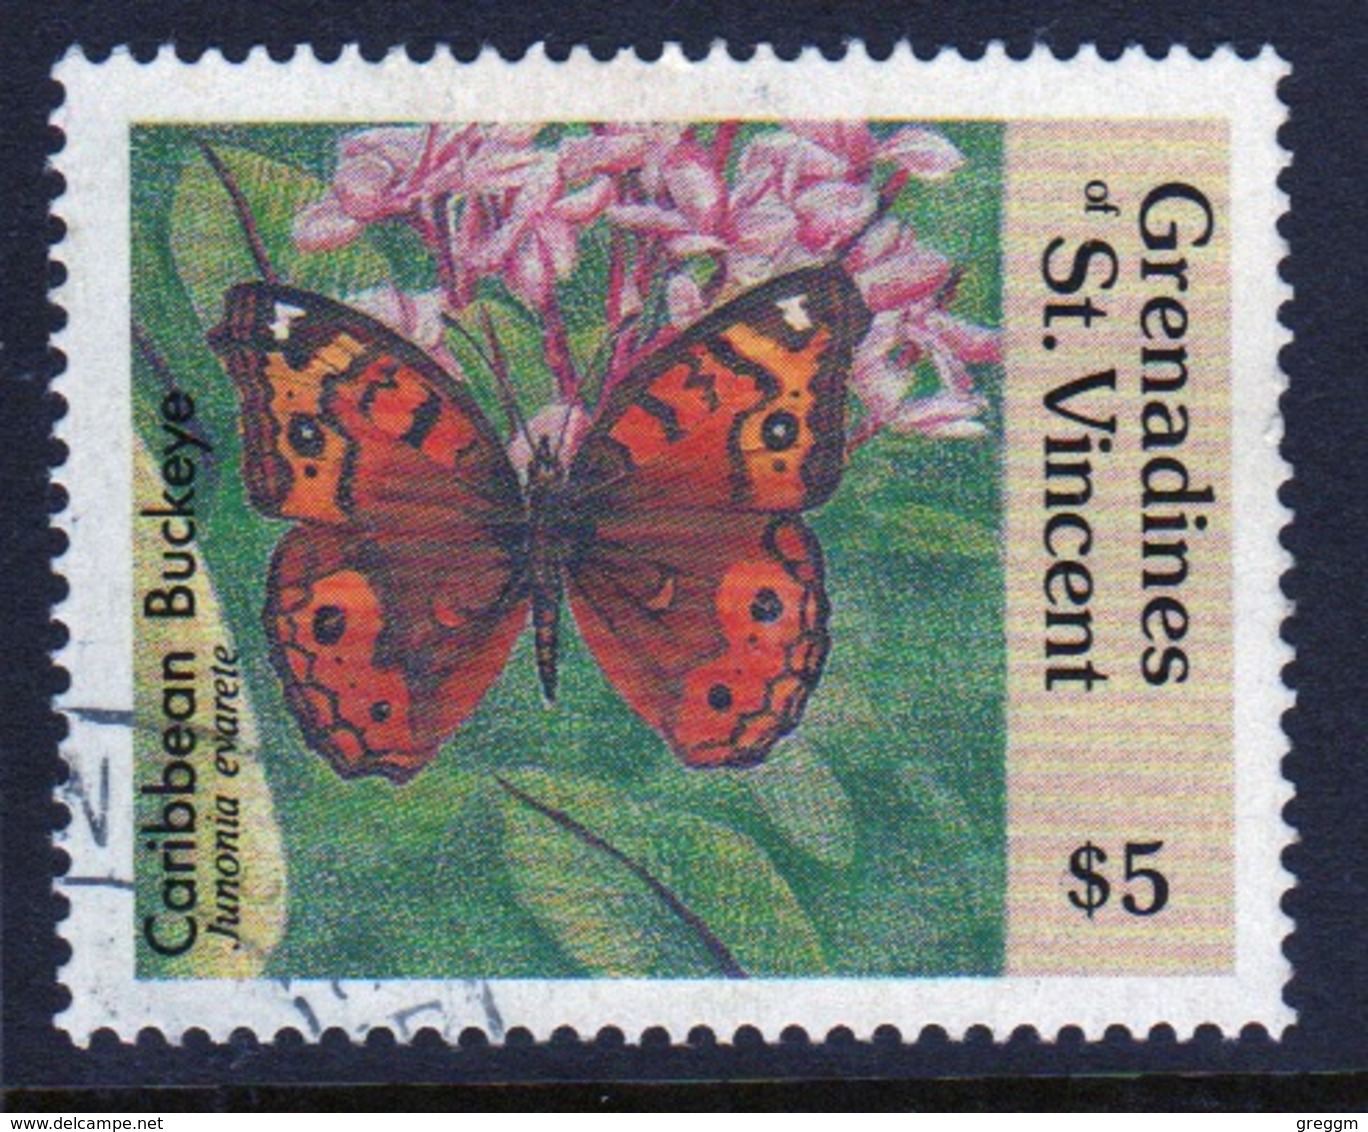 St.Vincent & Grenadines 1989 Single $5 Stamp From The Butterflies Set. - St.Vincent & Grenadines